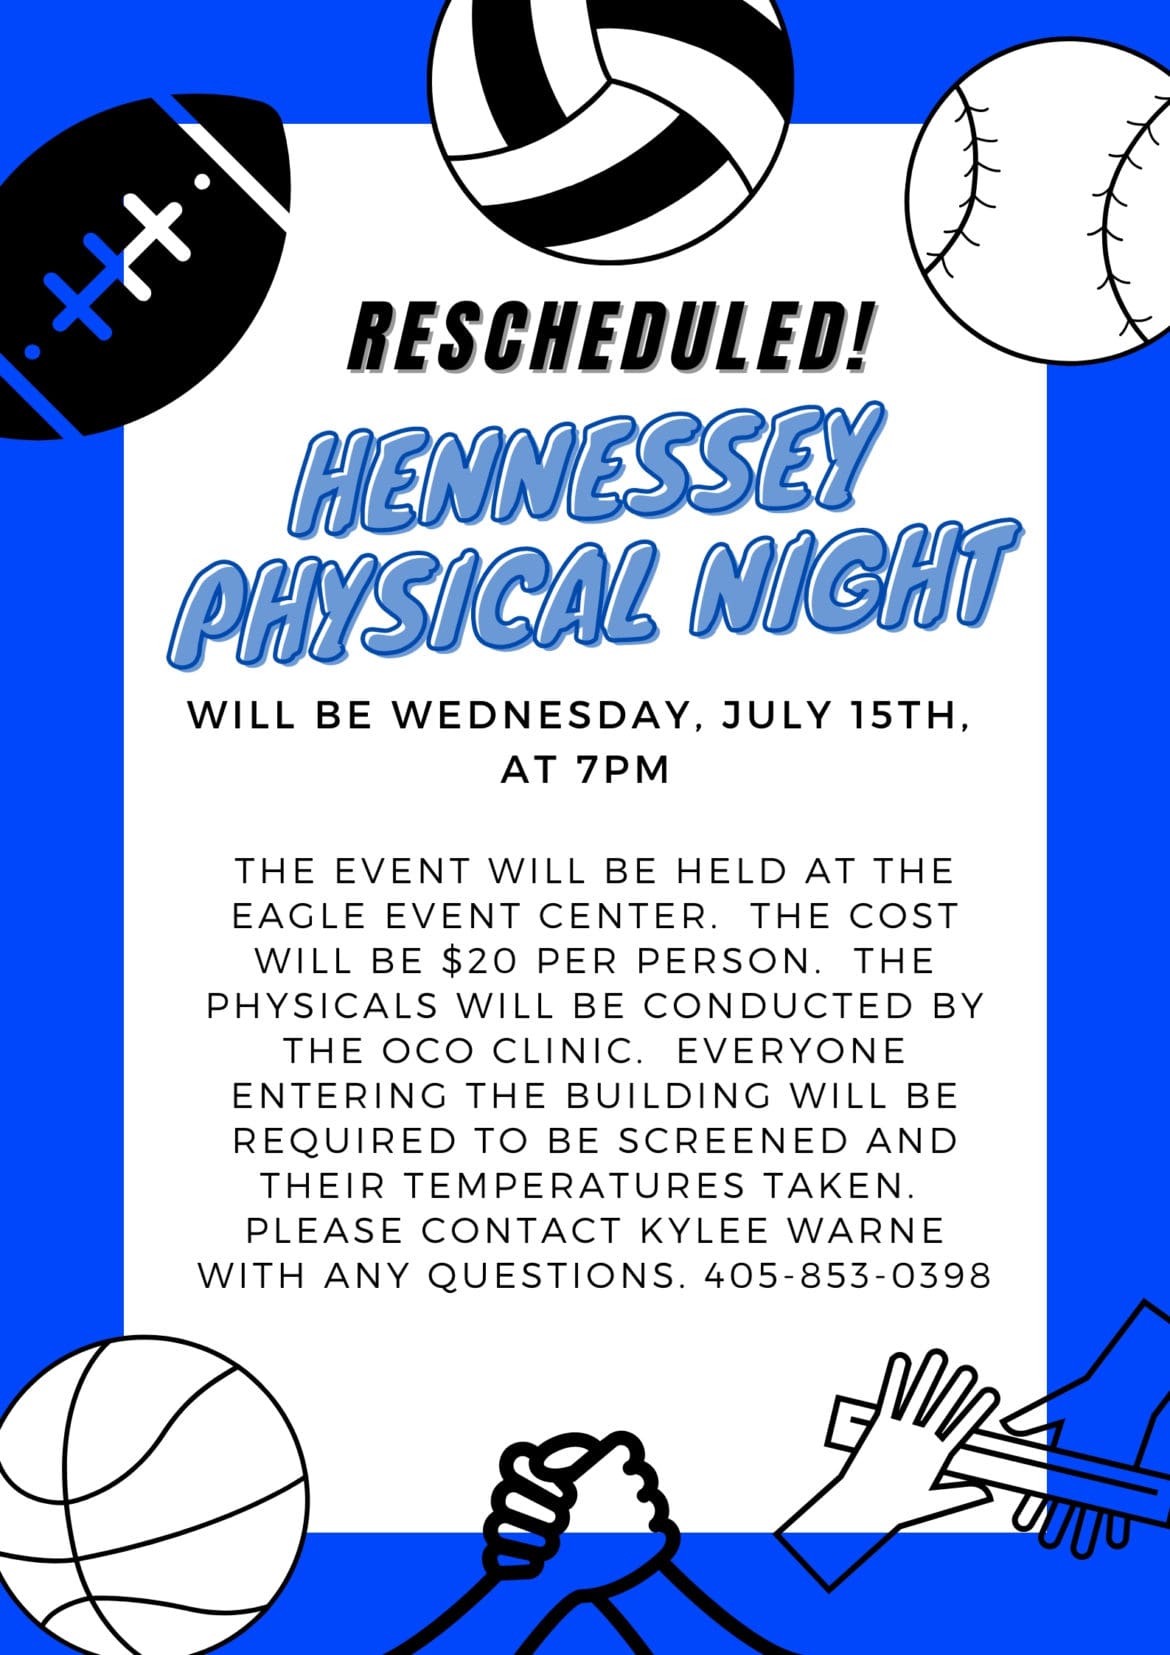 HENNESSEY PHYSICAL NIGHT RESCHEDULED